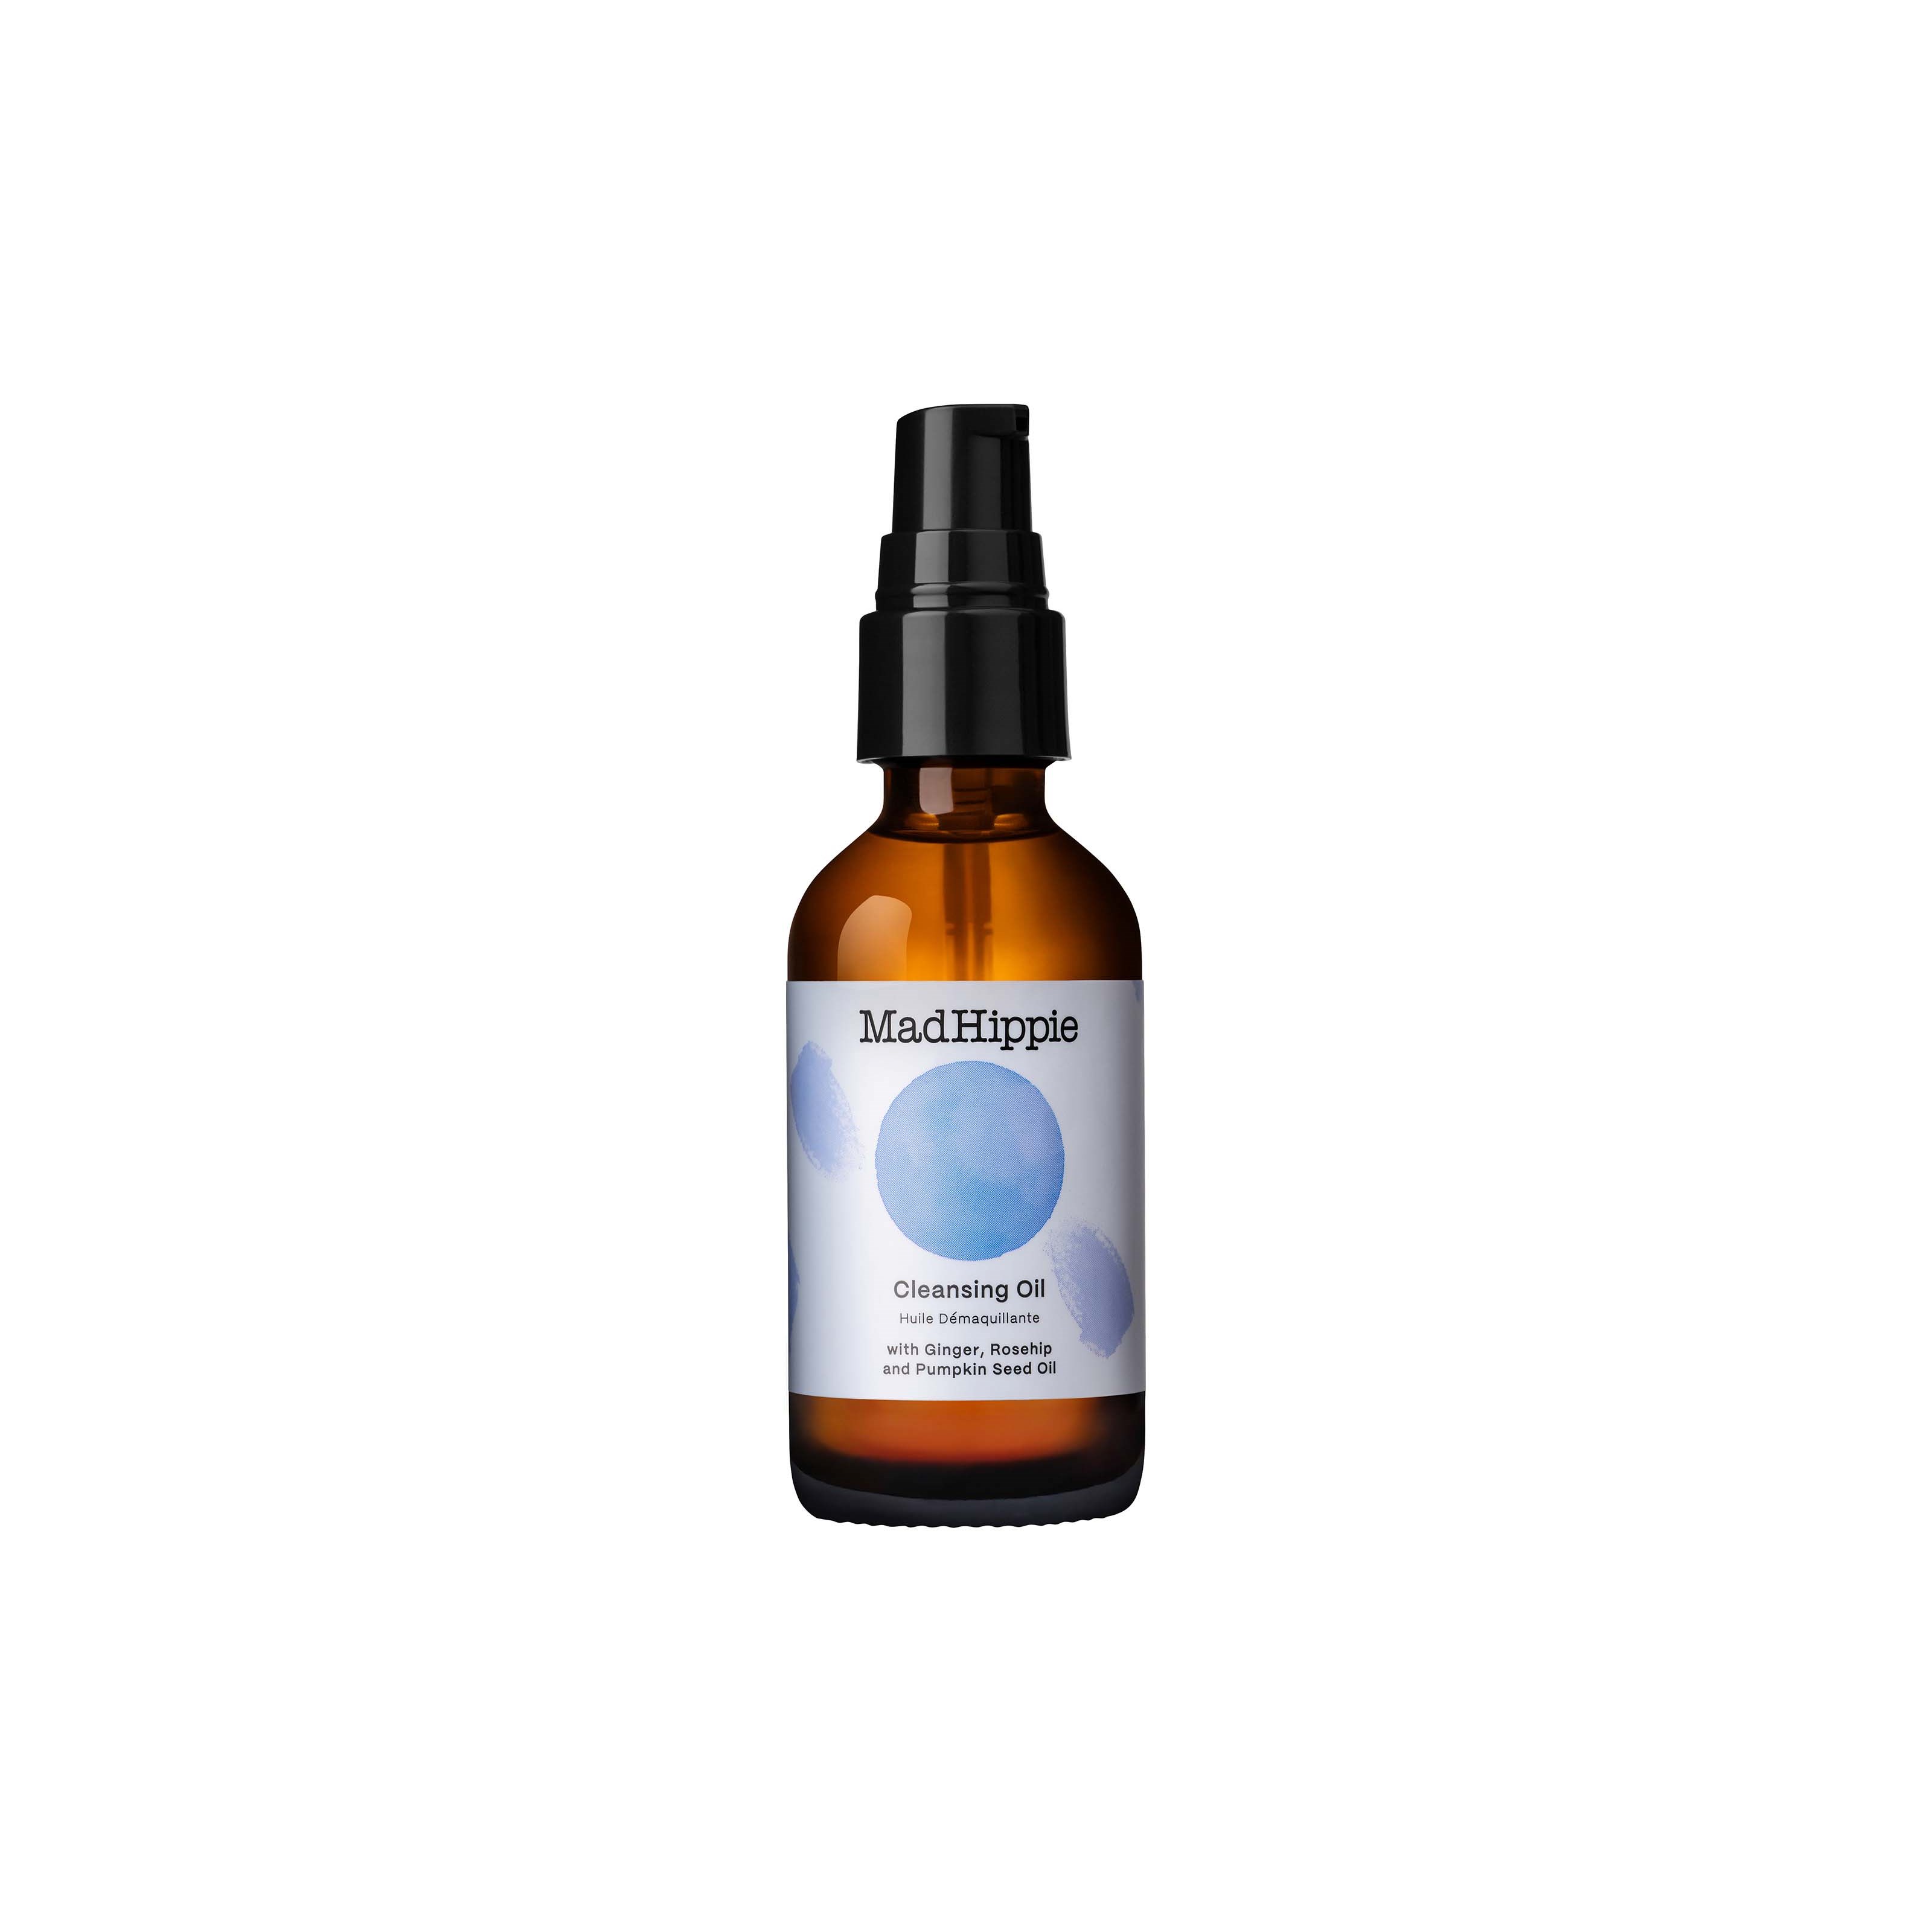 Mad Hippie Cleansing Oil 59 ml